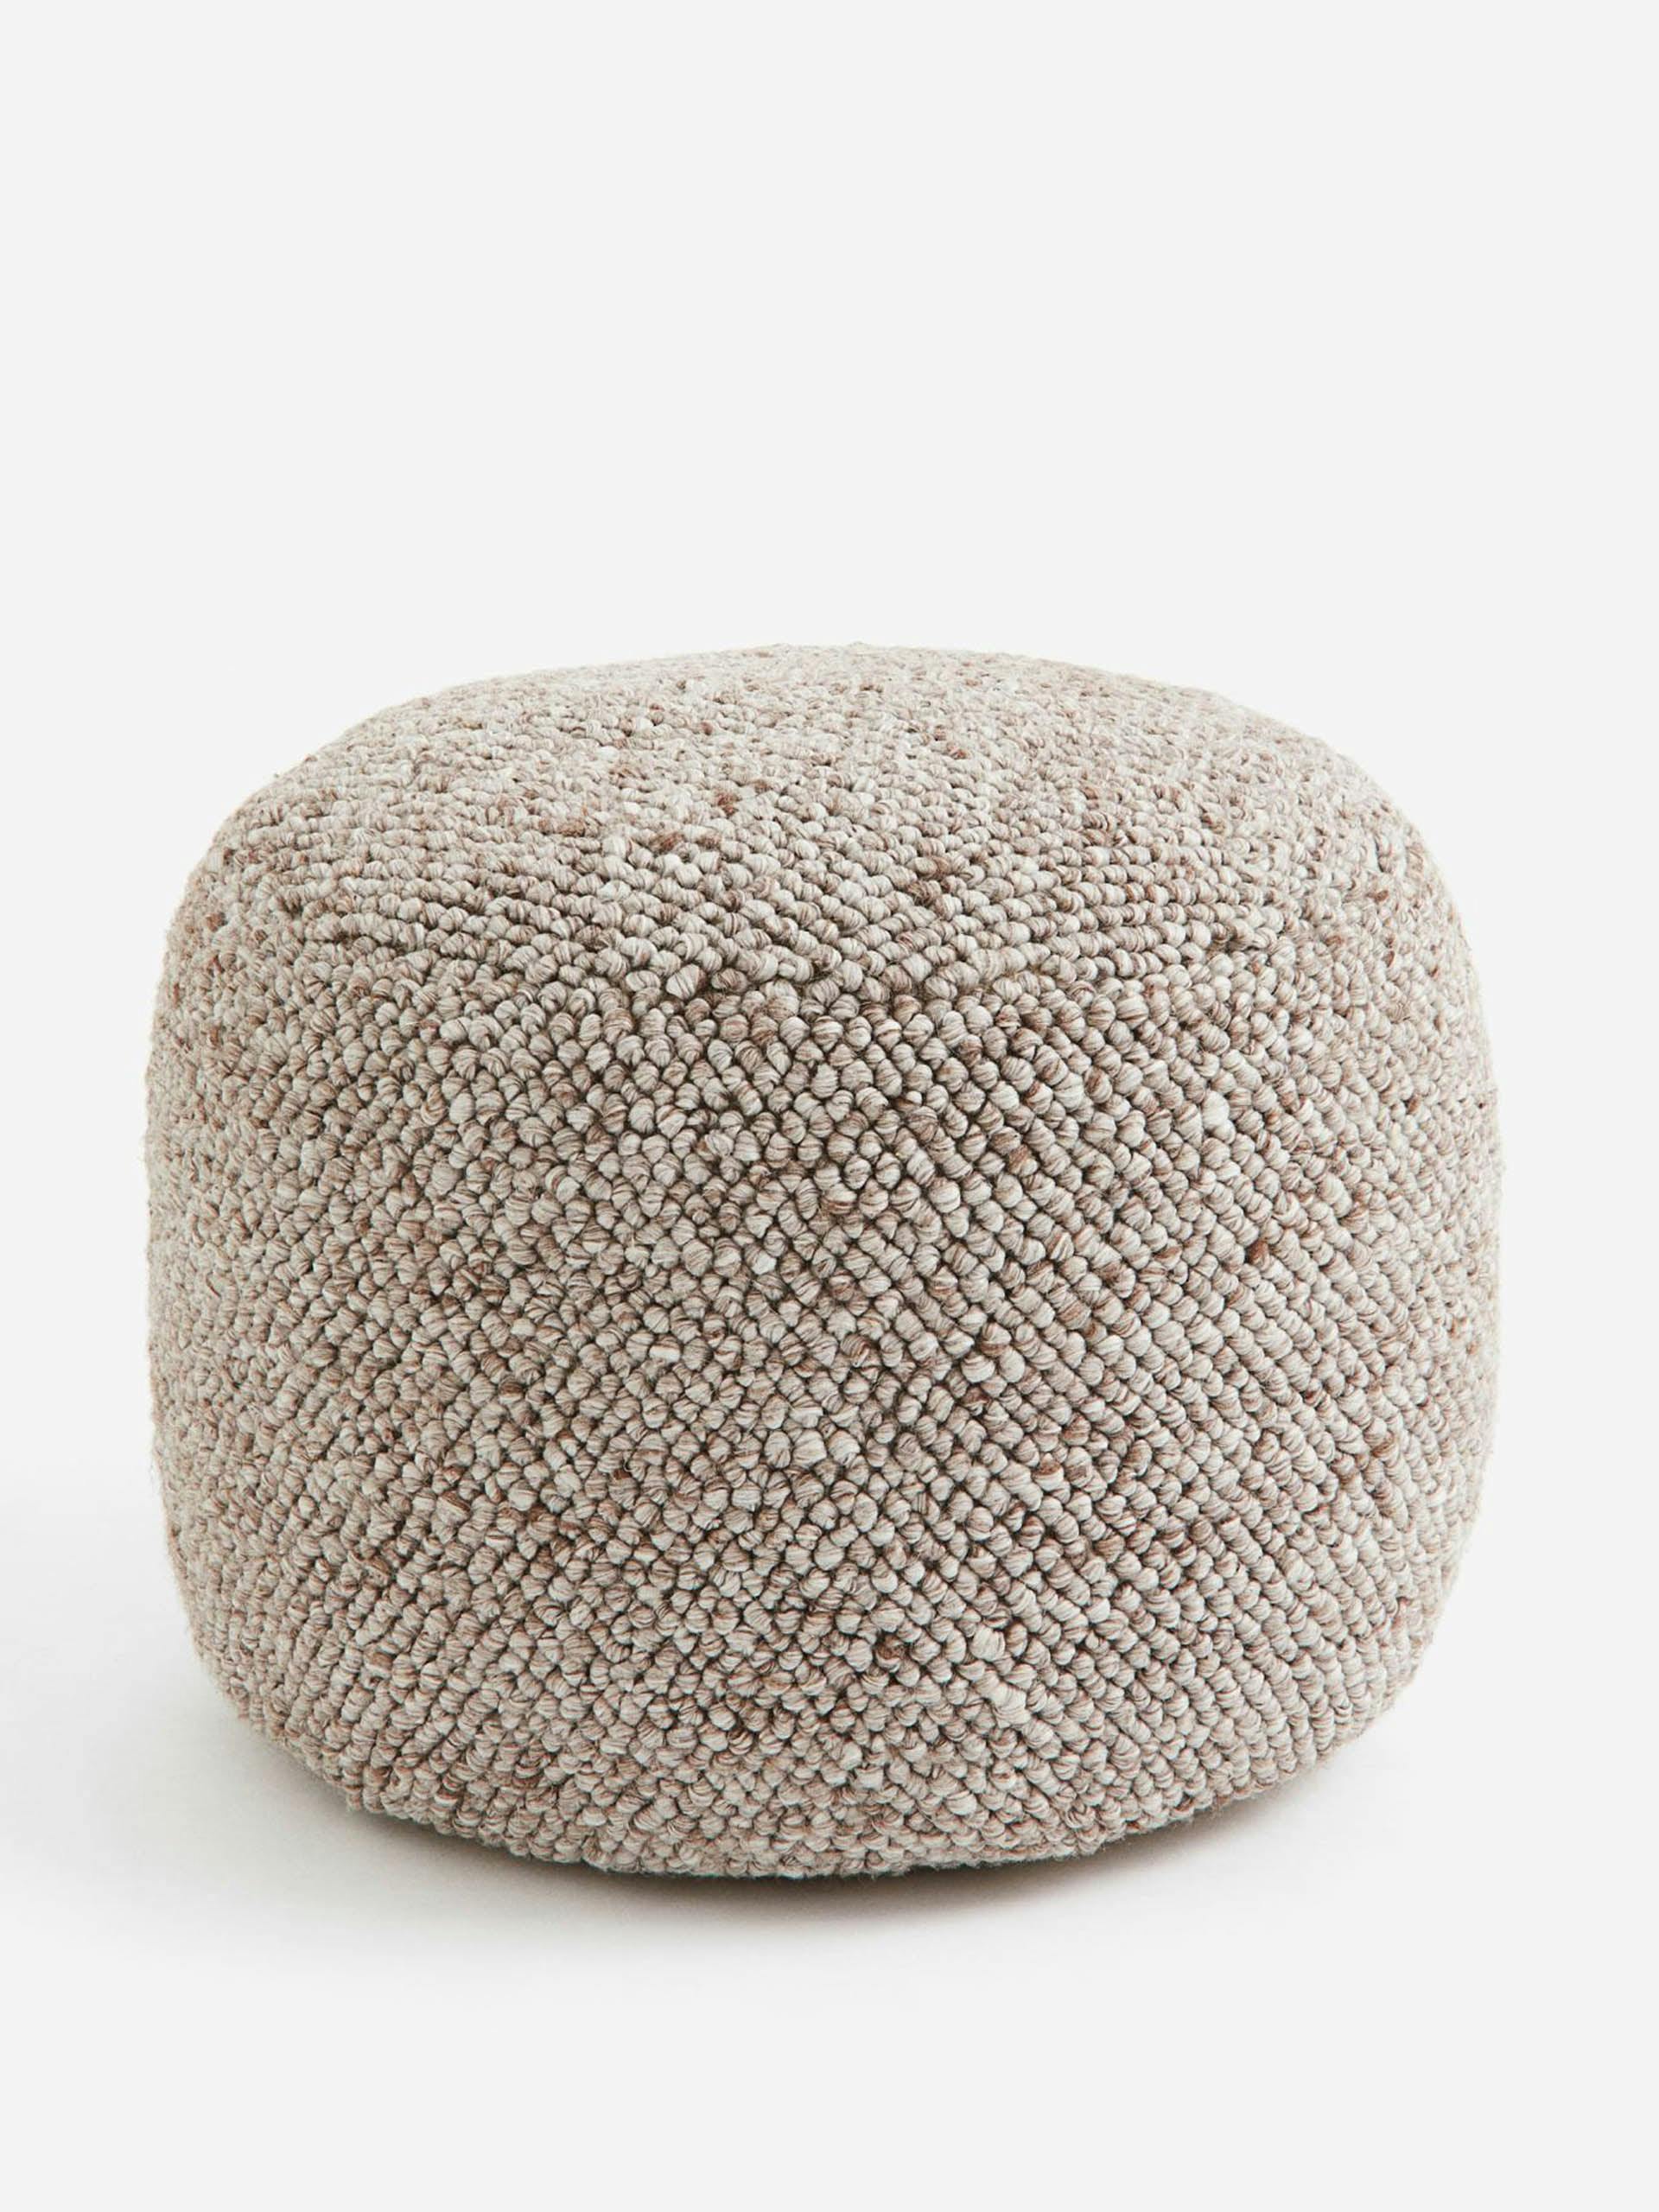 Grey and brown marl wool blend pouffe